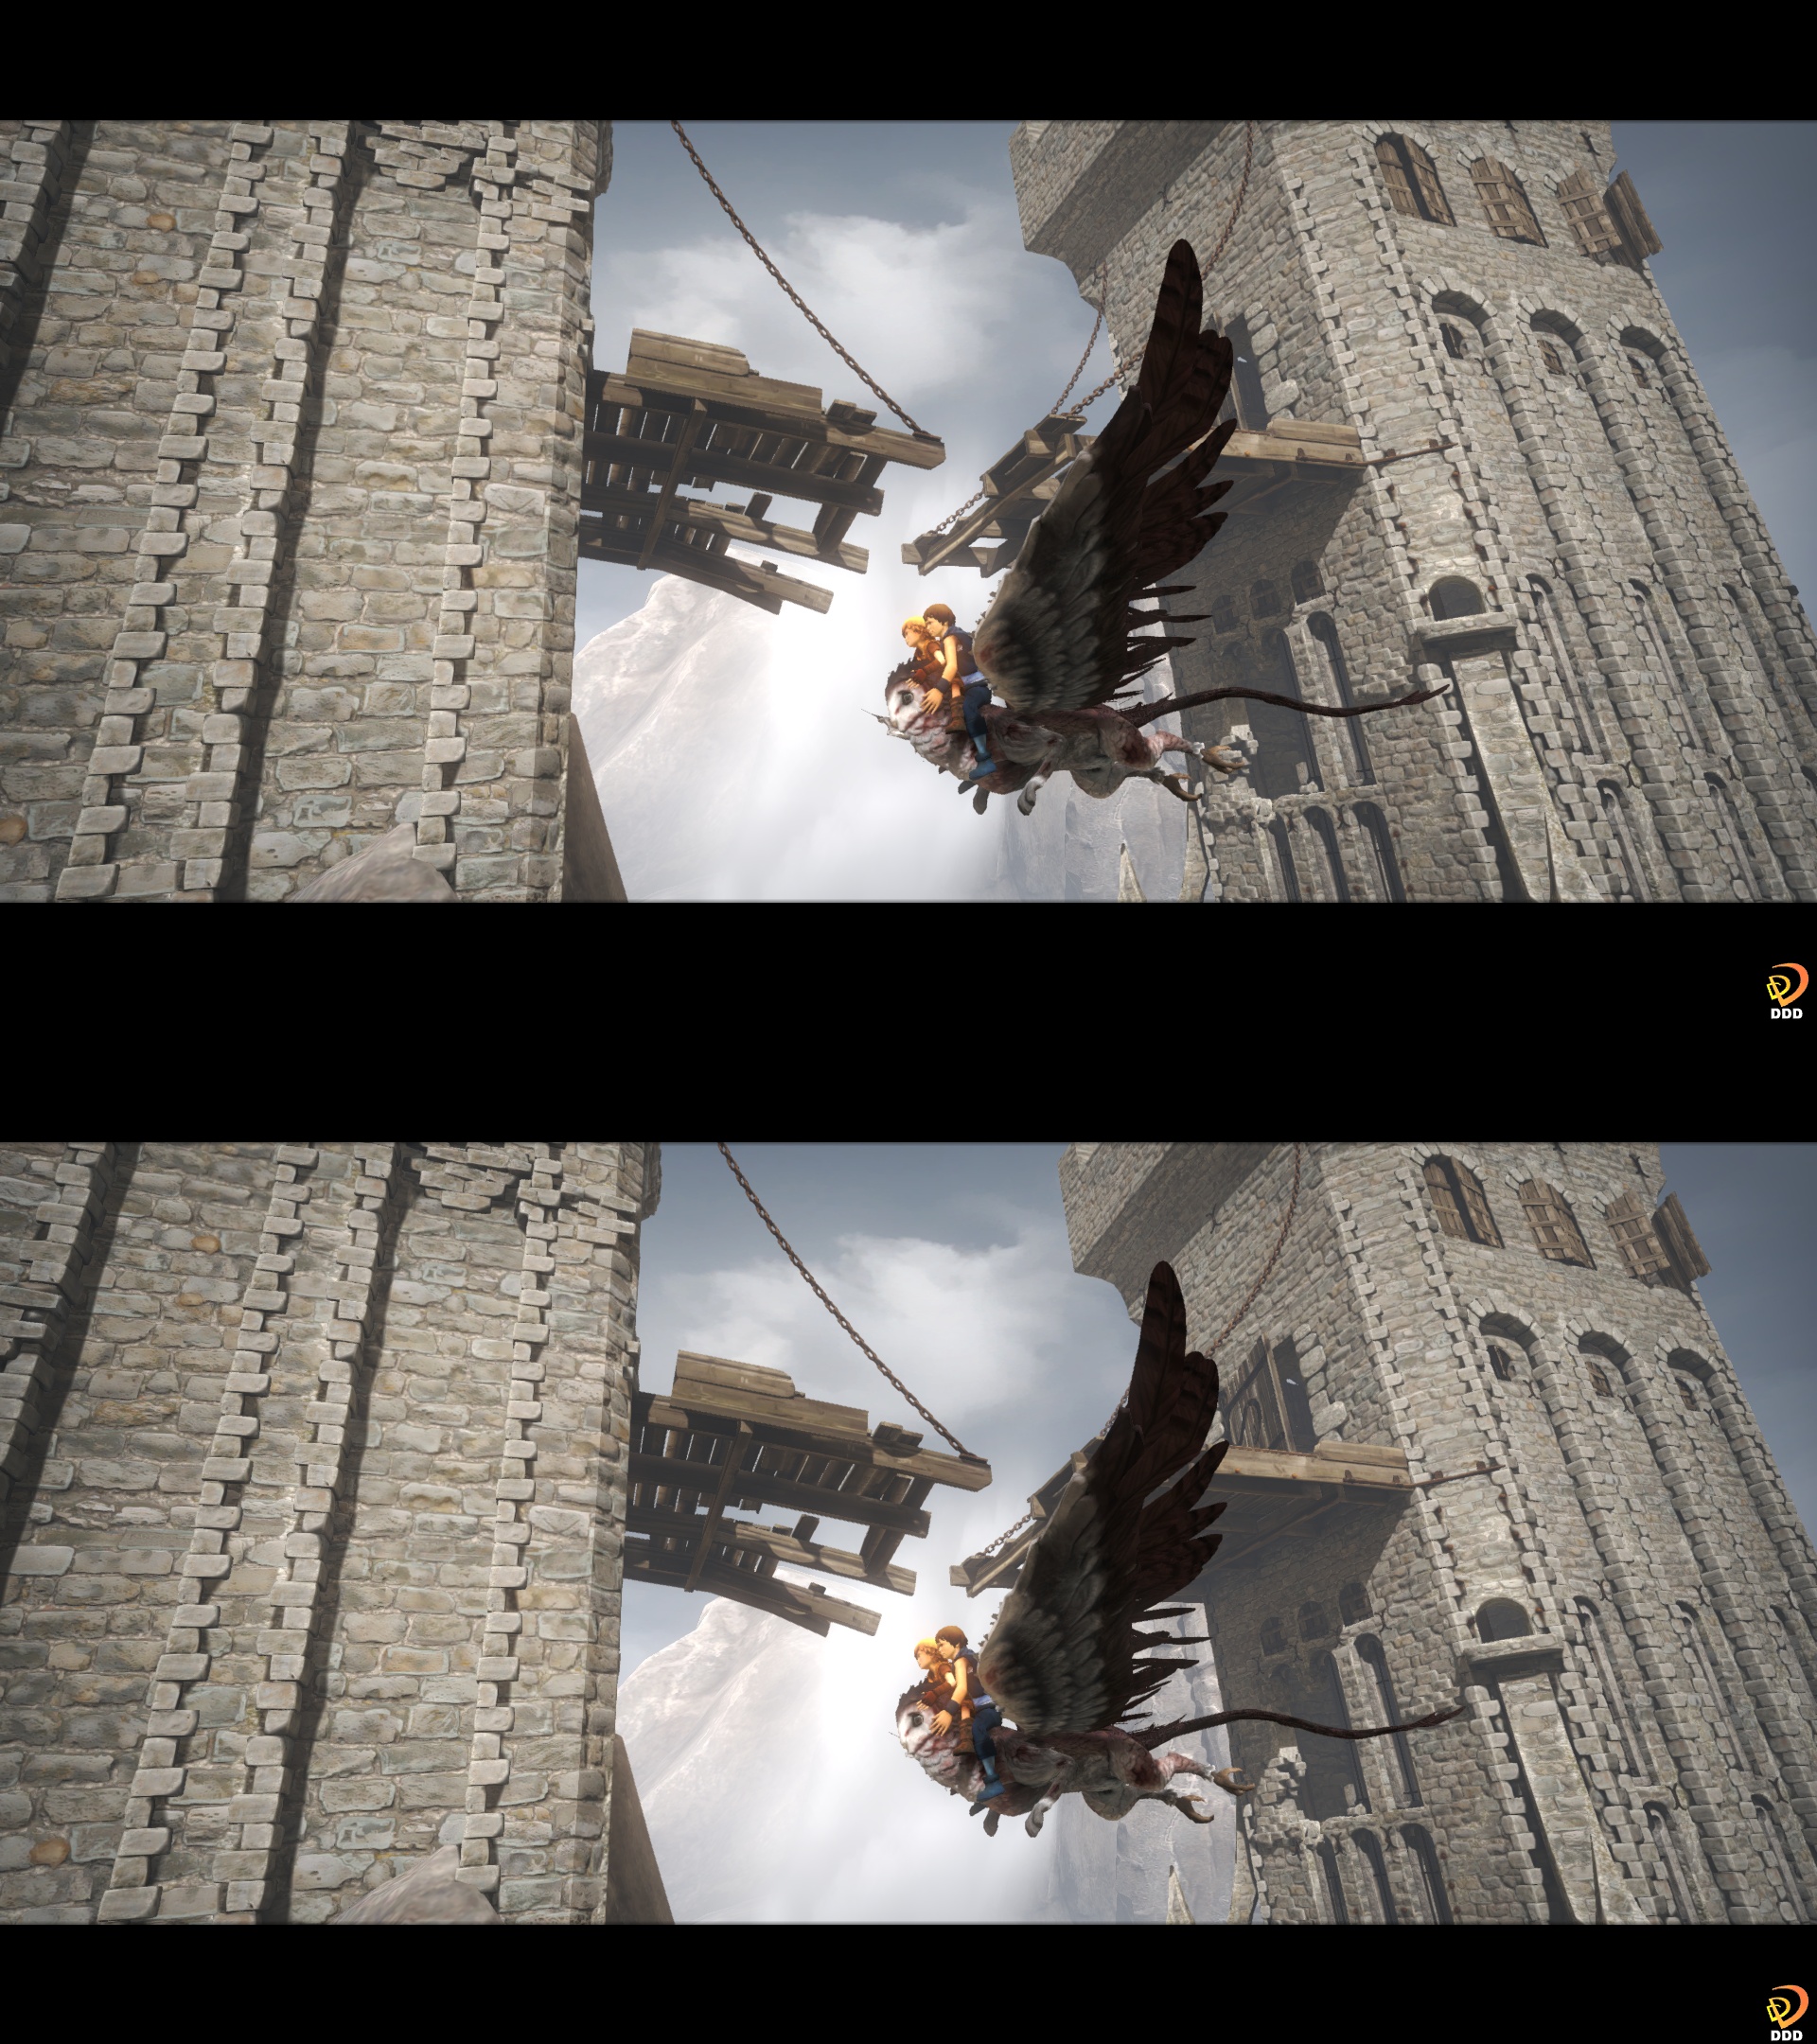 Brothers - A Tale of Two Sons 3D - Flying by rocketman5004